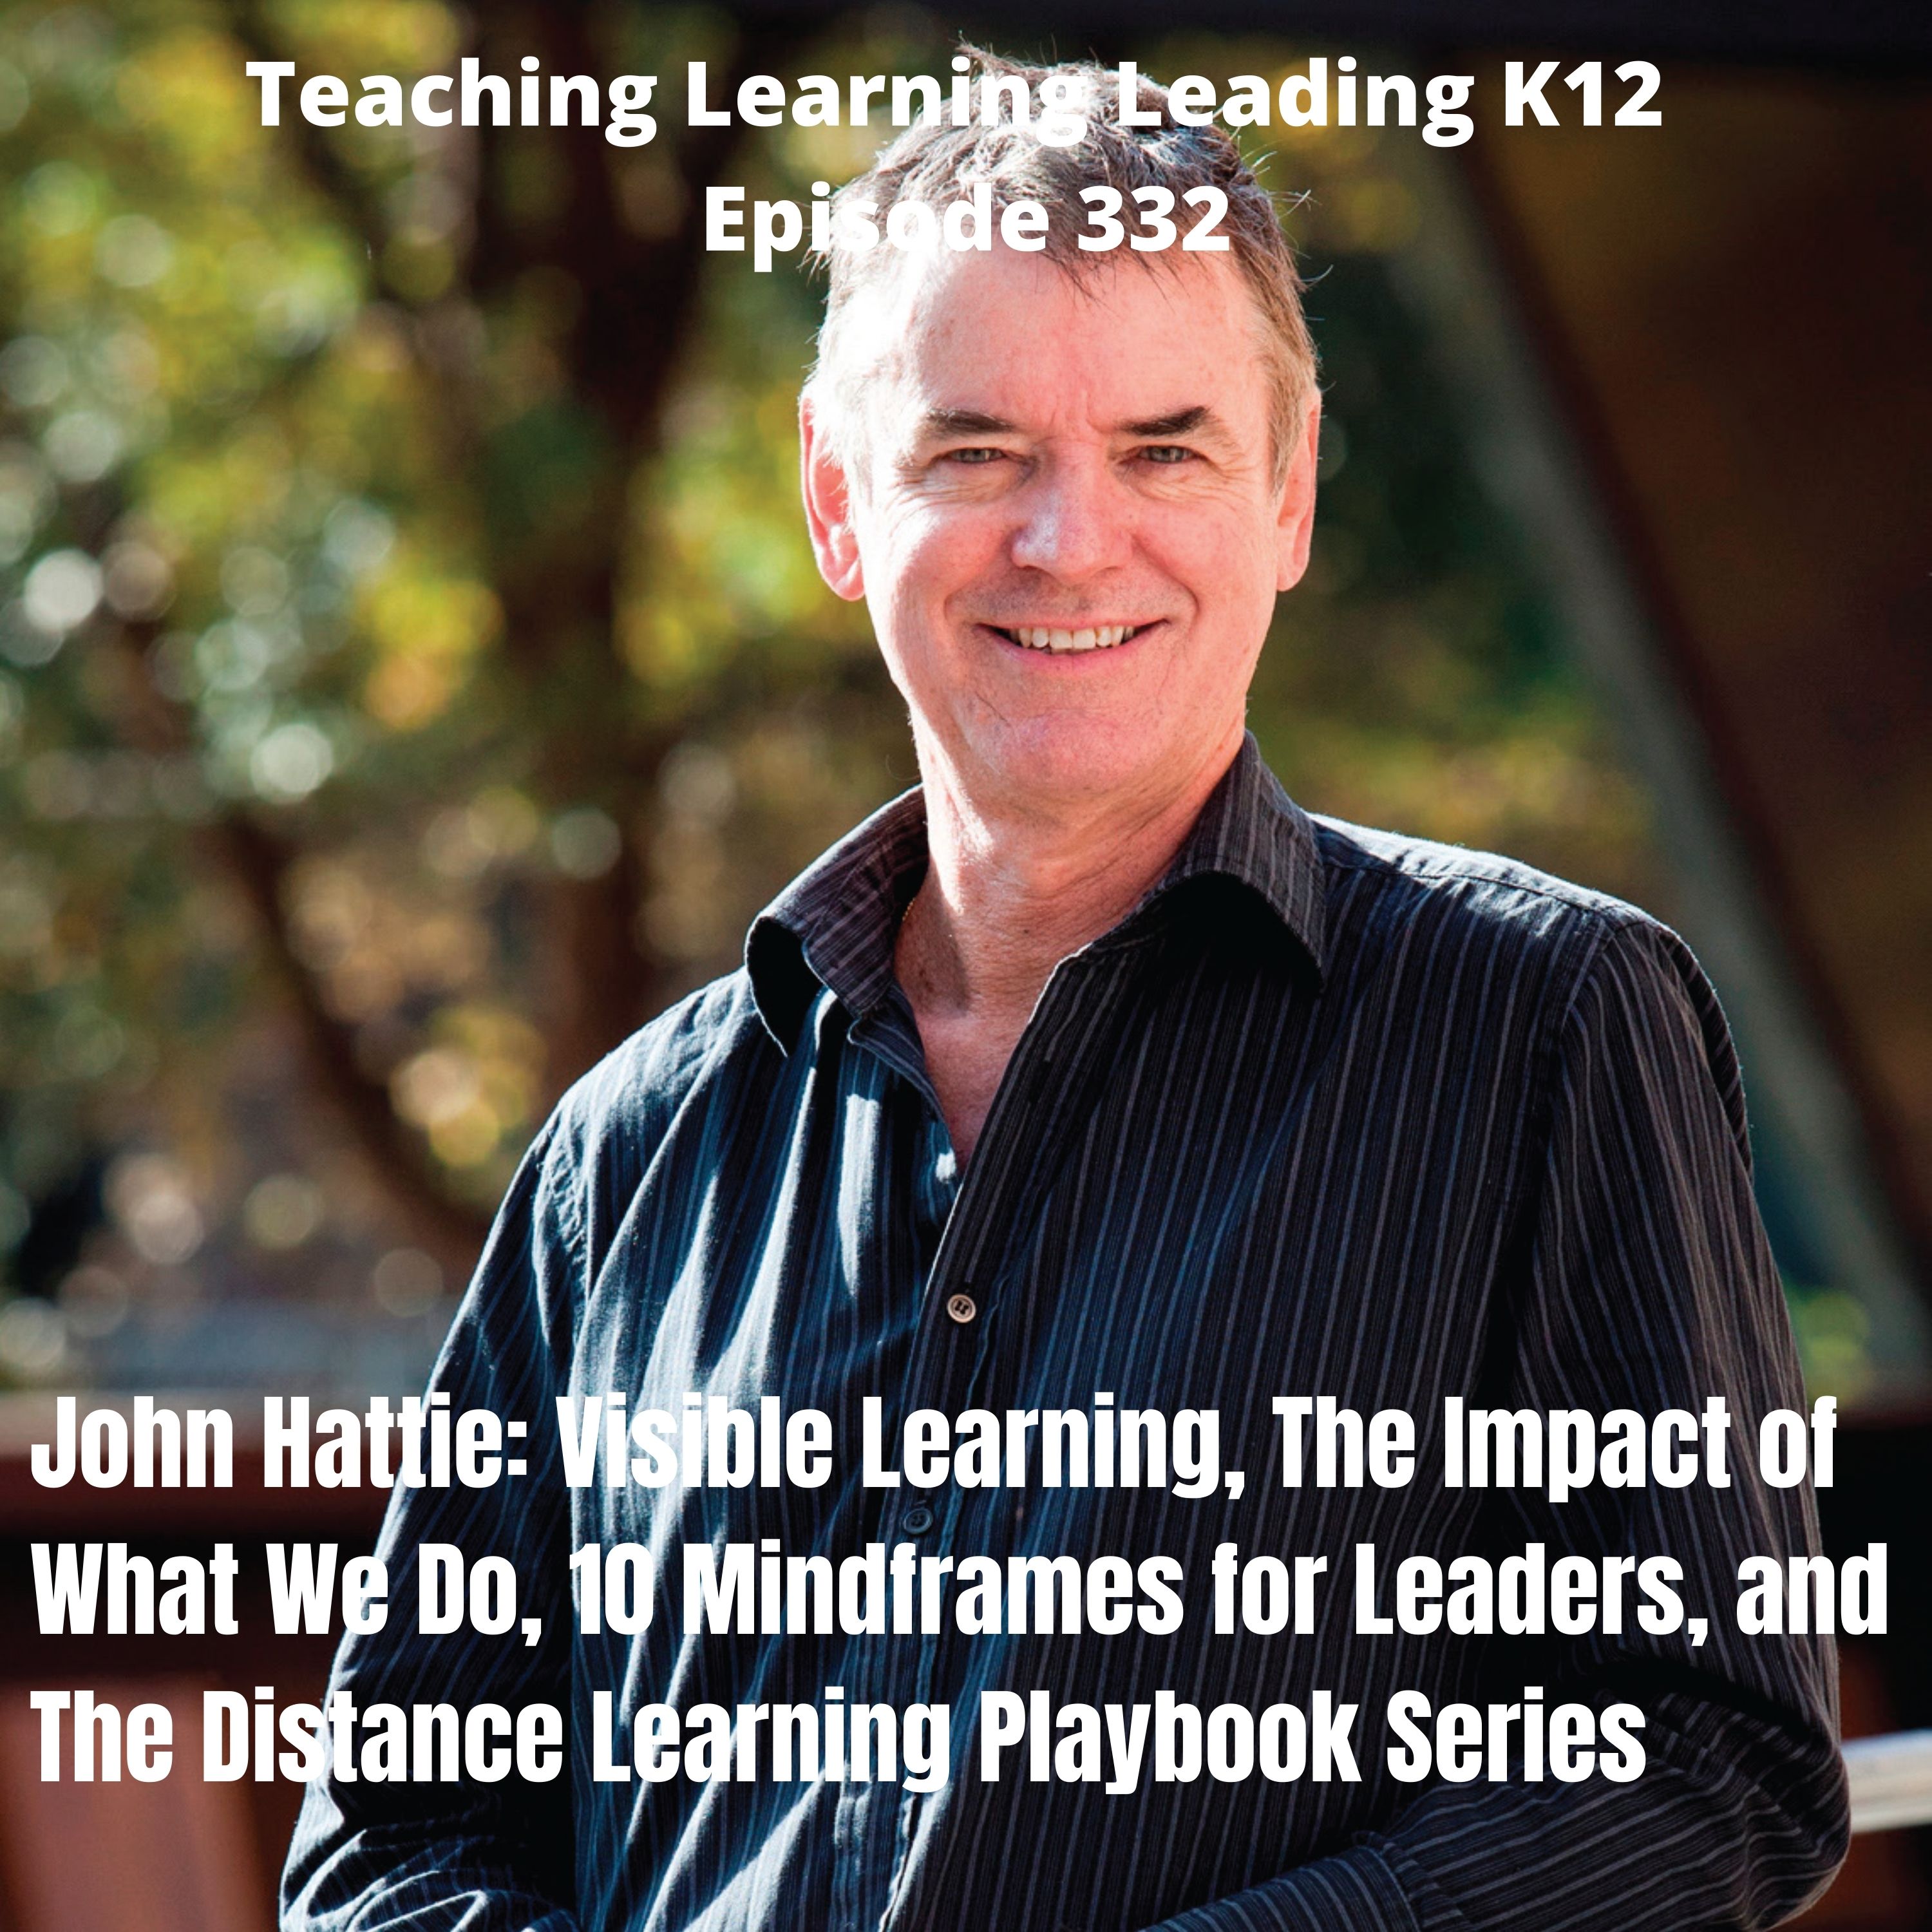 John Hattie: Visible Learning, The Impact of What We Do, 10 Mindframes for Leaders, and The Distance Learning Playbook Series K-12 - 332 Image